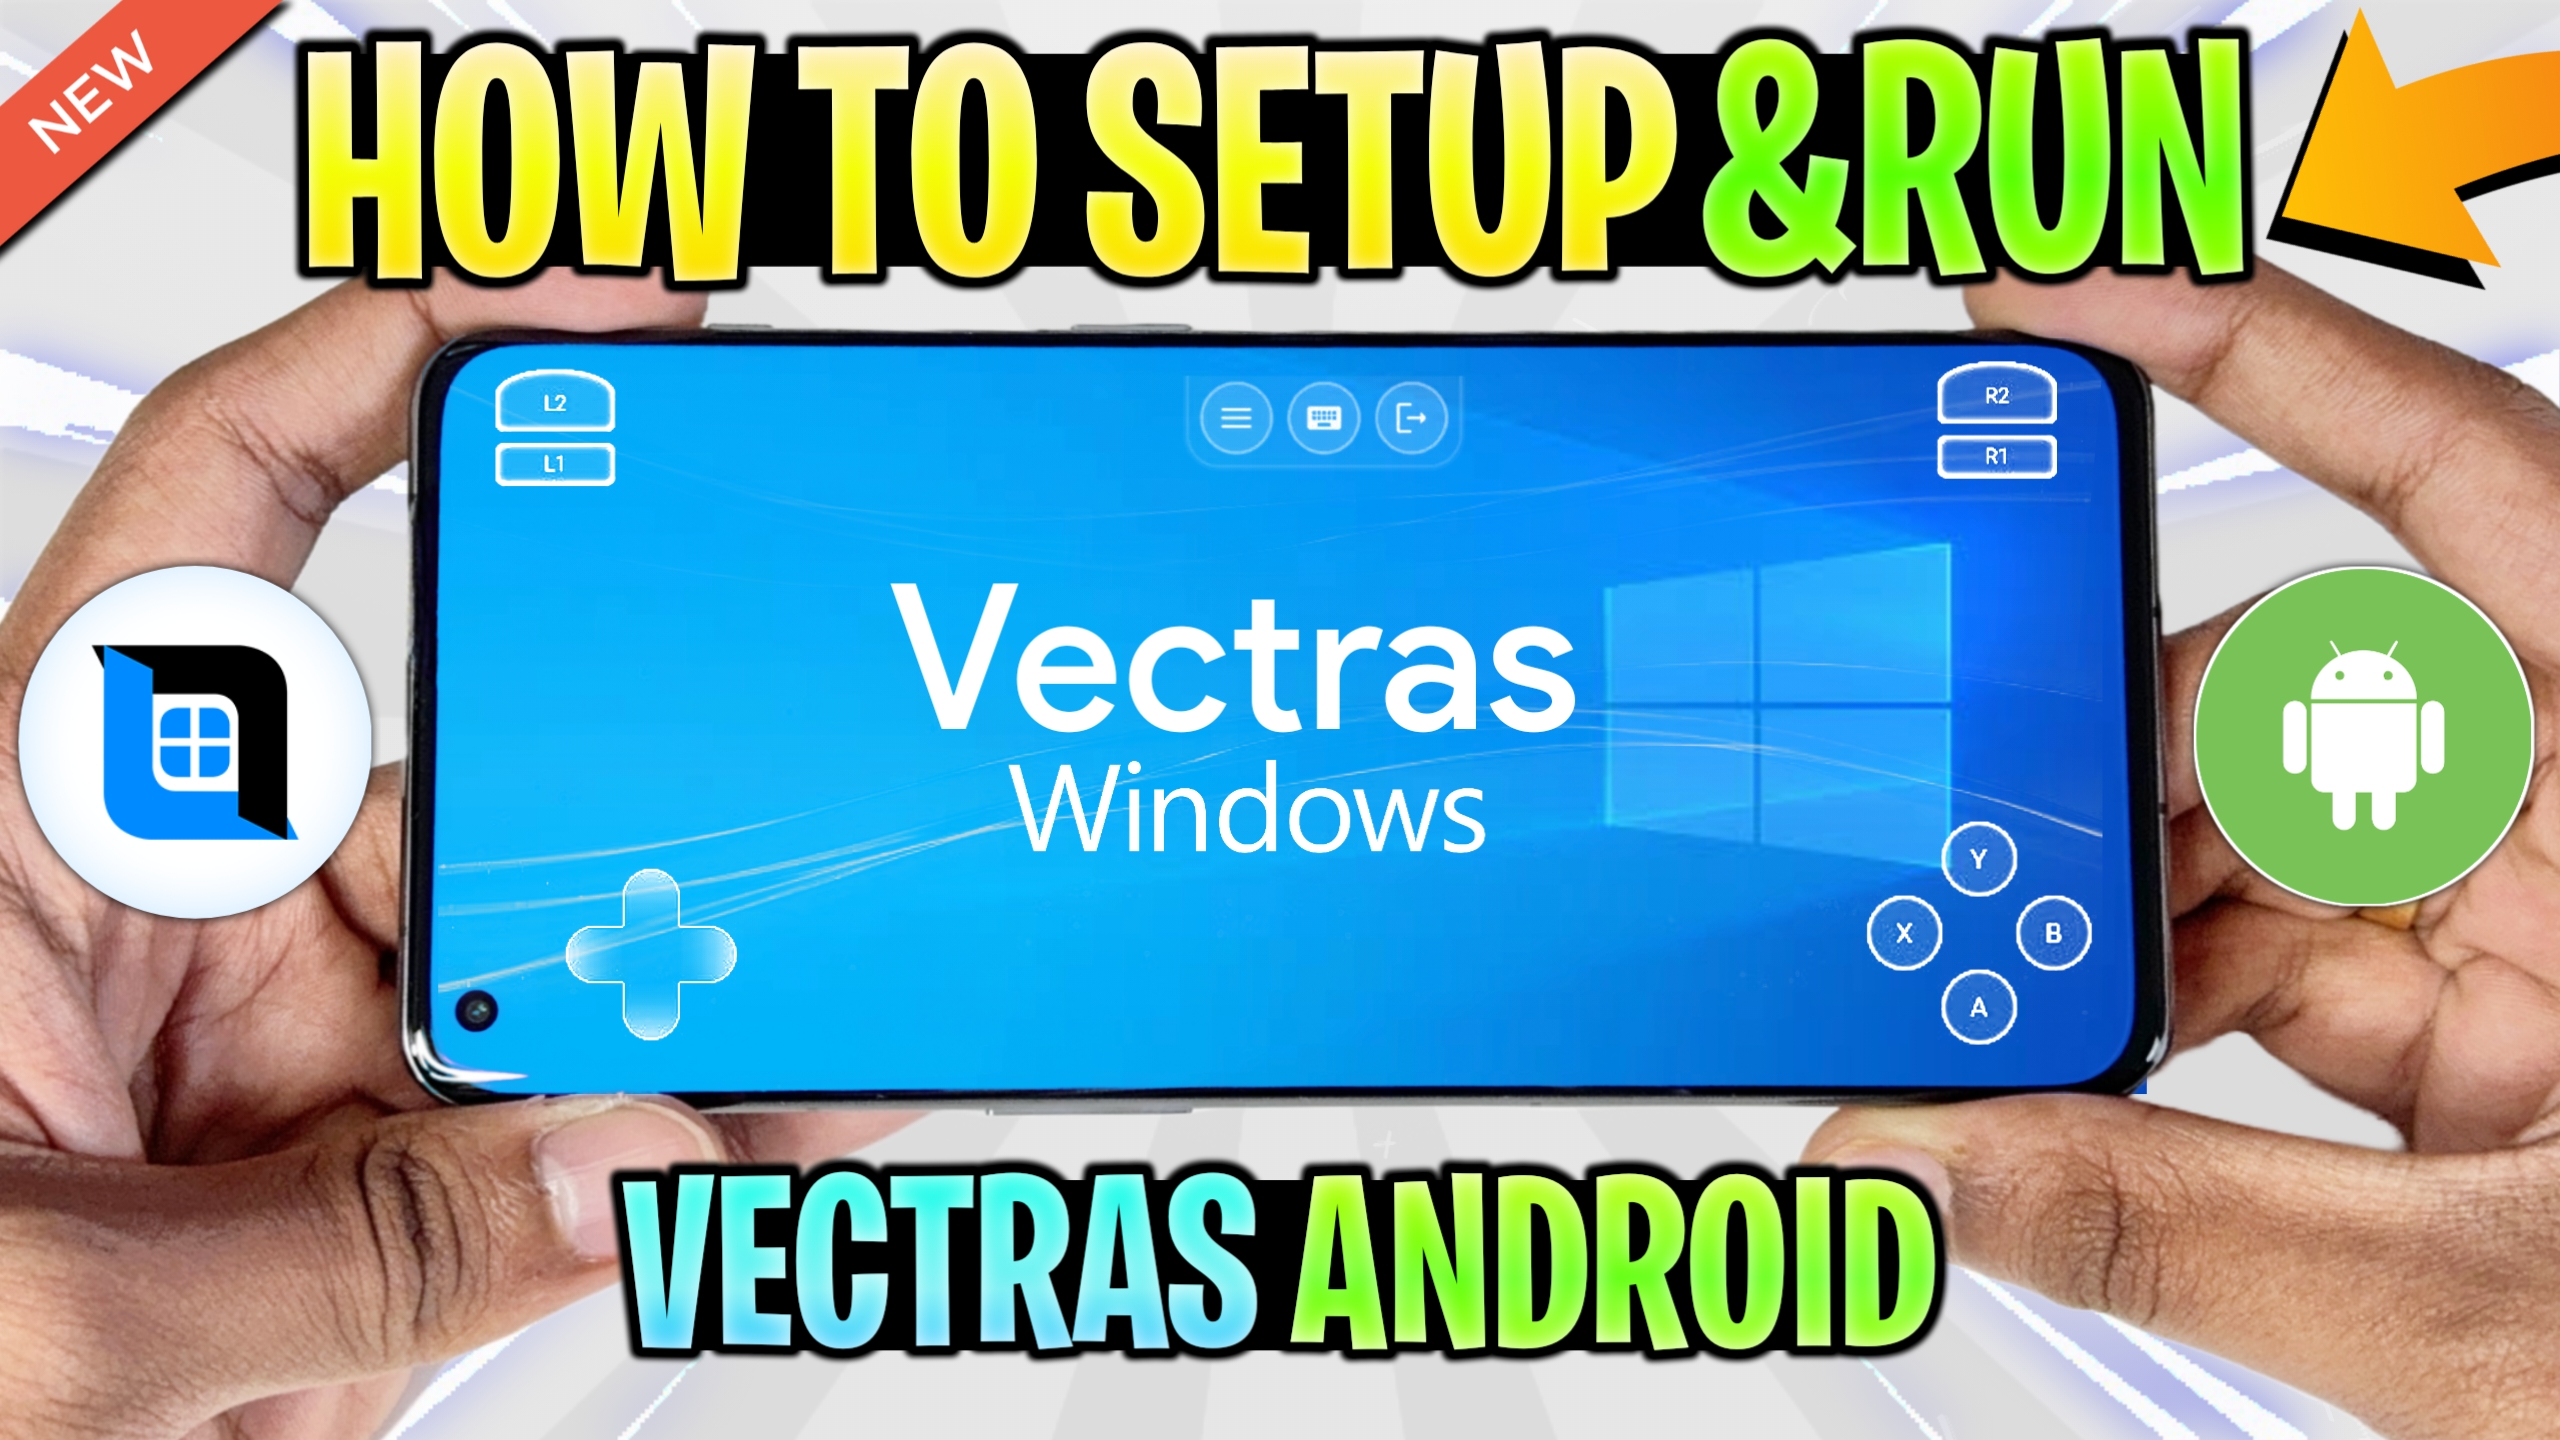 How To Setup Vectras Windows Emulator For Android – Download